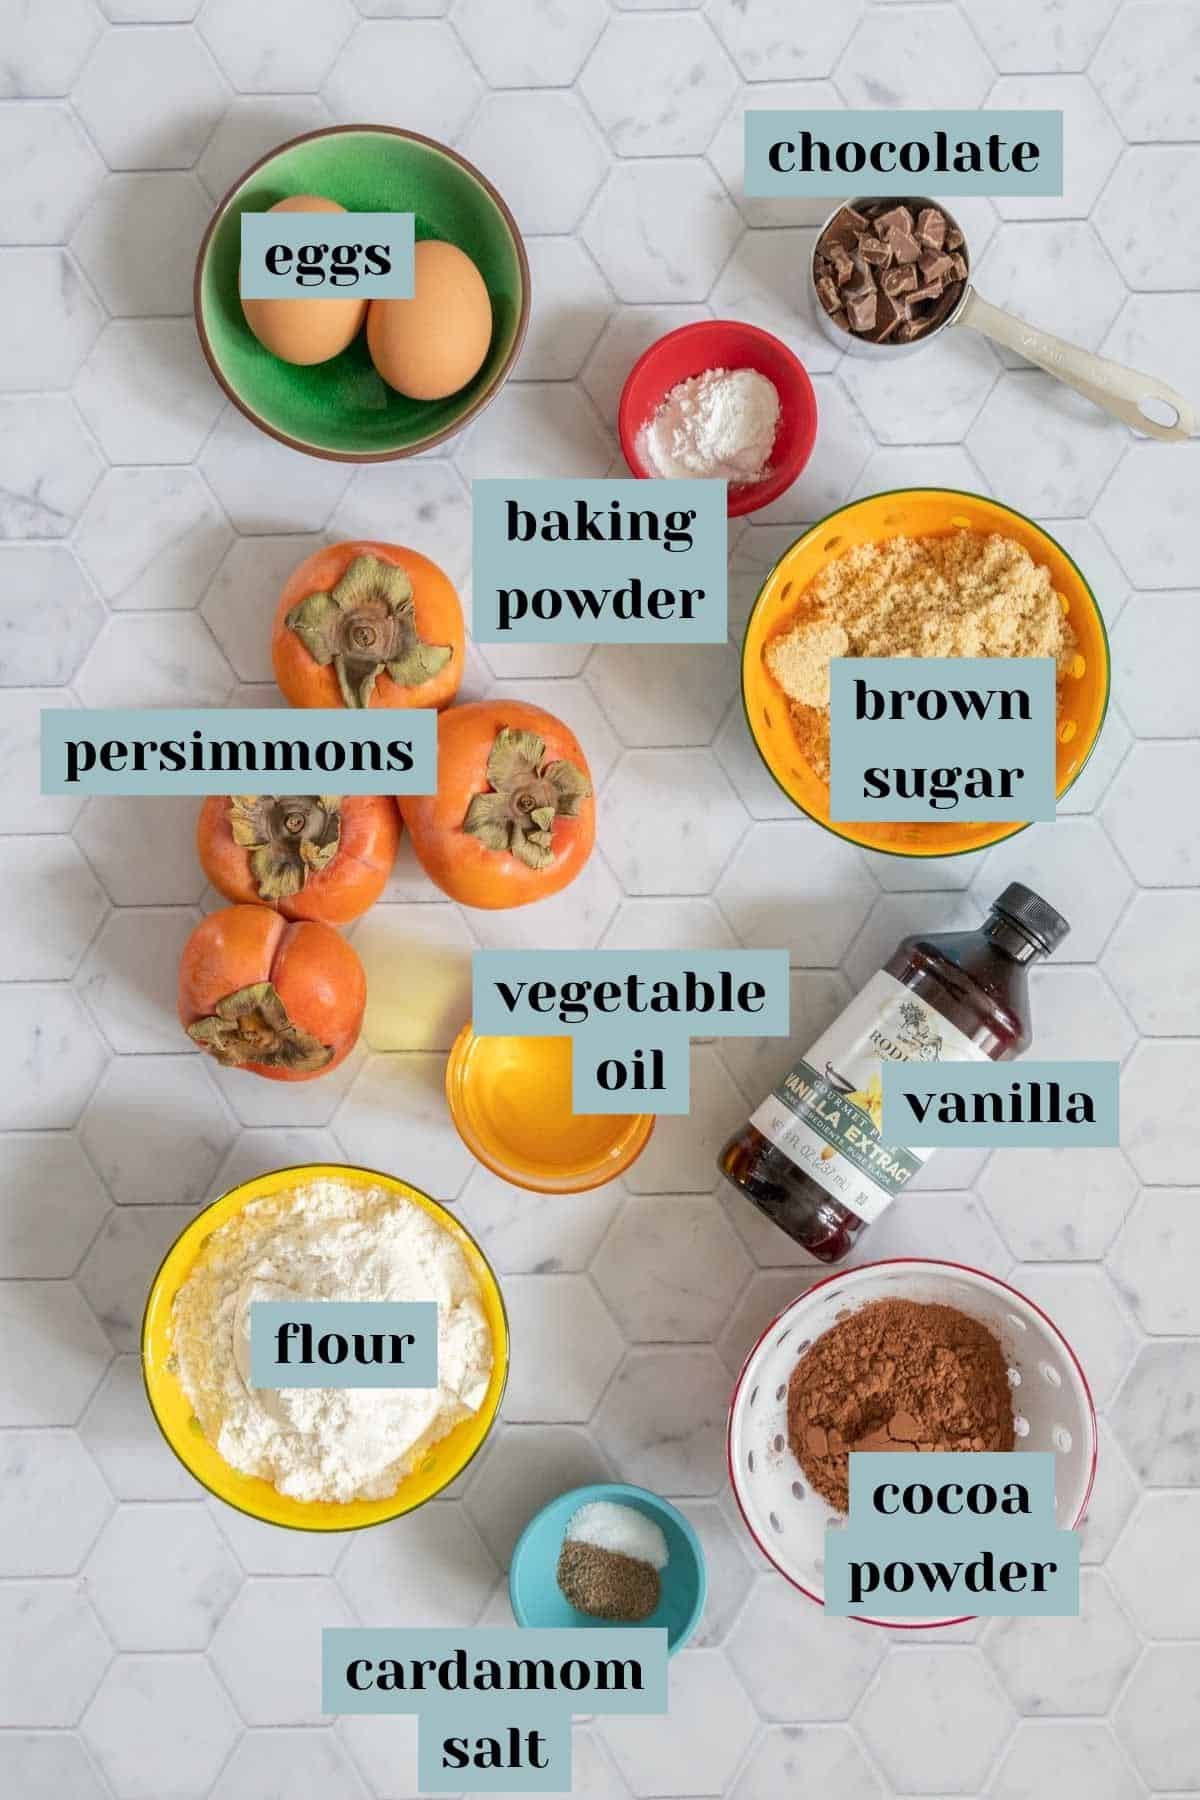 Ingredients for chocolate persimmon cake on a tile surface with labels.